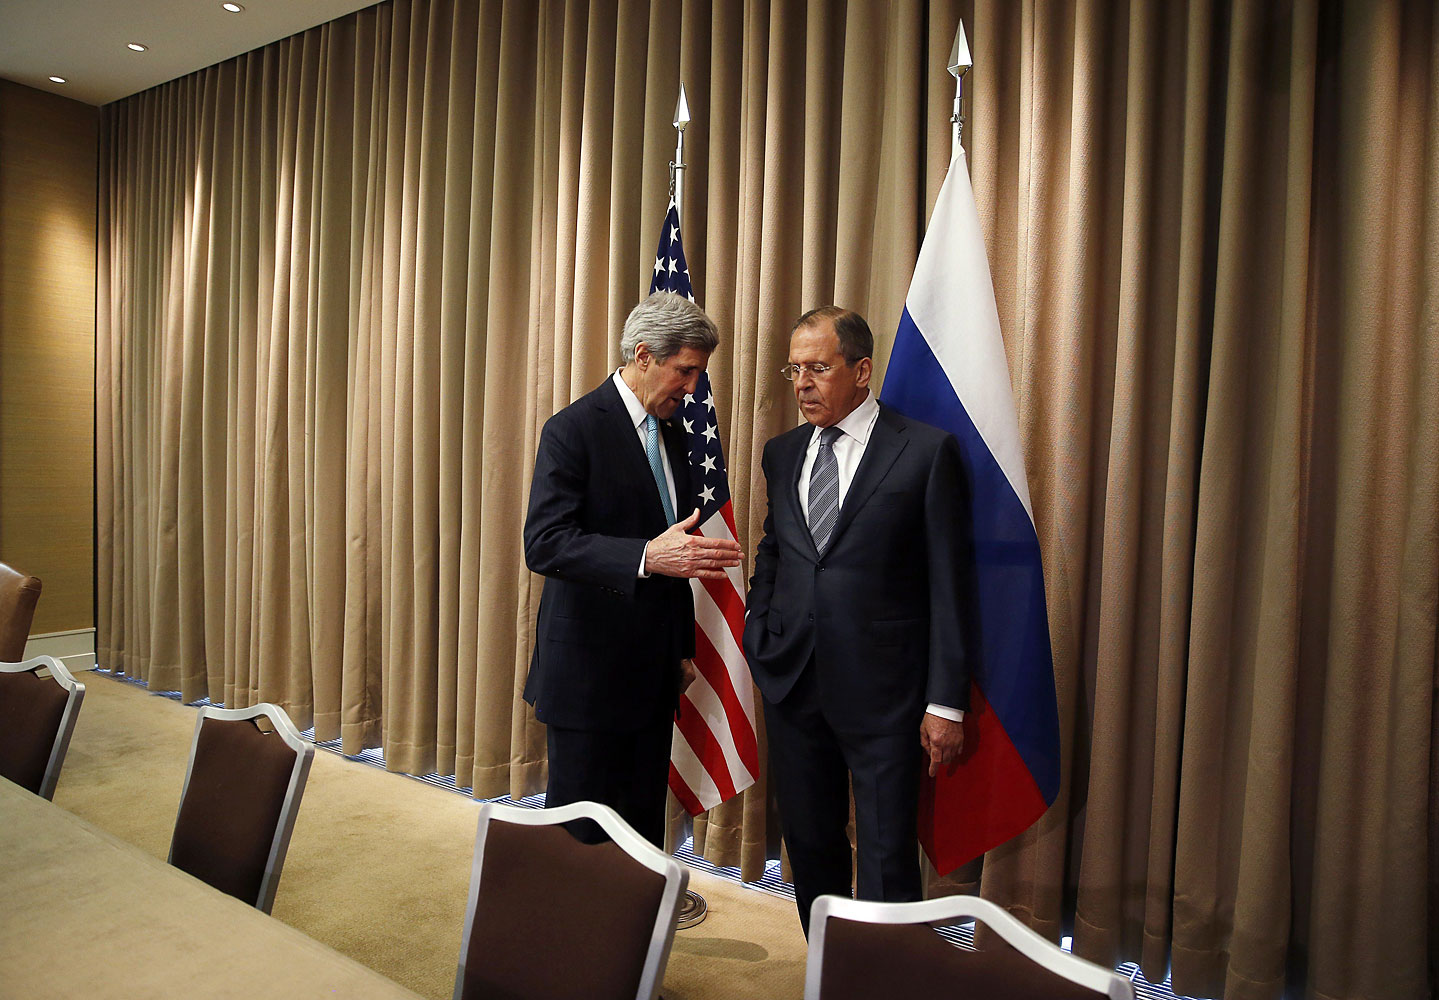 US Secretary of State John Kerry, left, talks with Russian Foreign minister Sergei Lavrov at the start of a bilateral meeting to discuss the ongoing situation in Ukraine on April 17, 2014 in Geneva.  (Jim Bourg—AFP/Getty Images)